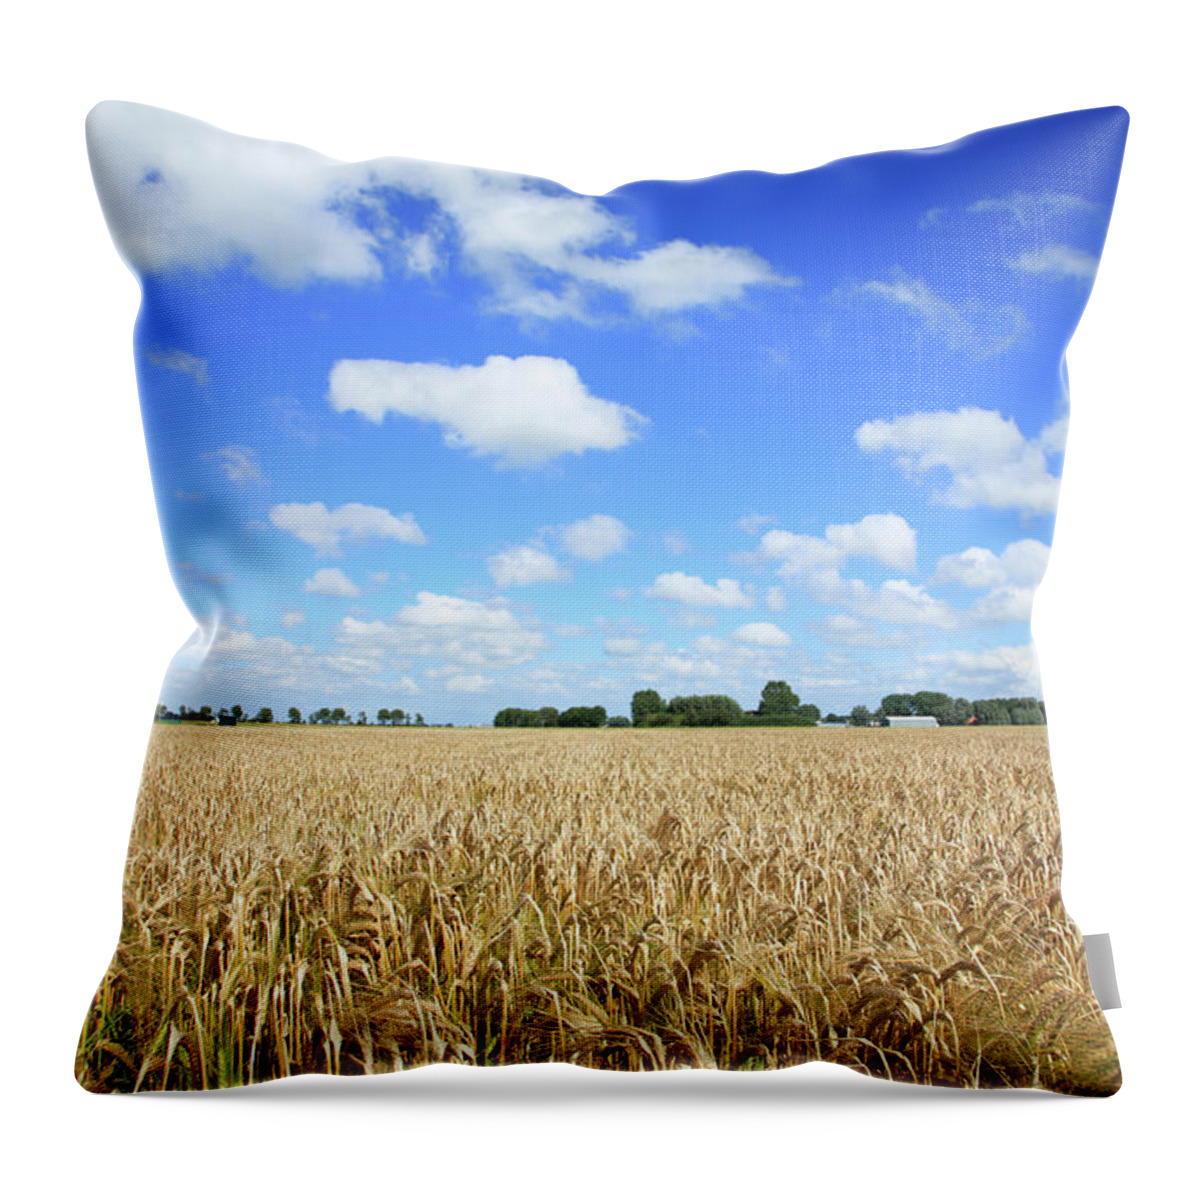 Scenics Throw Pillow featuring the photograph Wheat Field by Micheldenijs